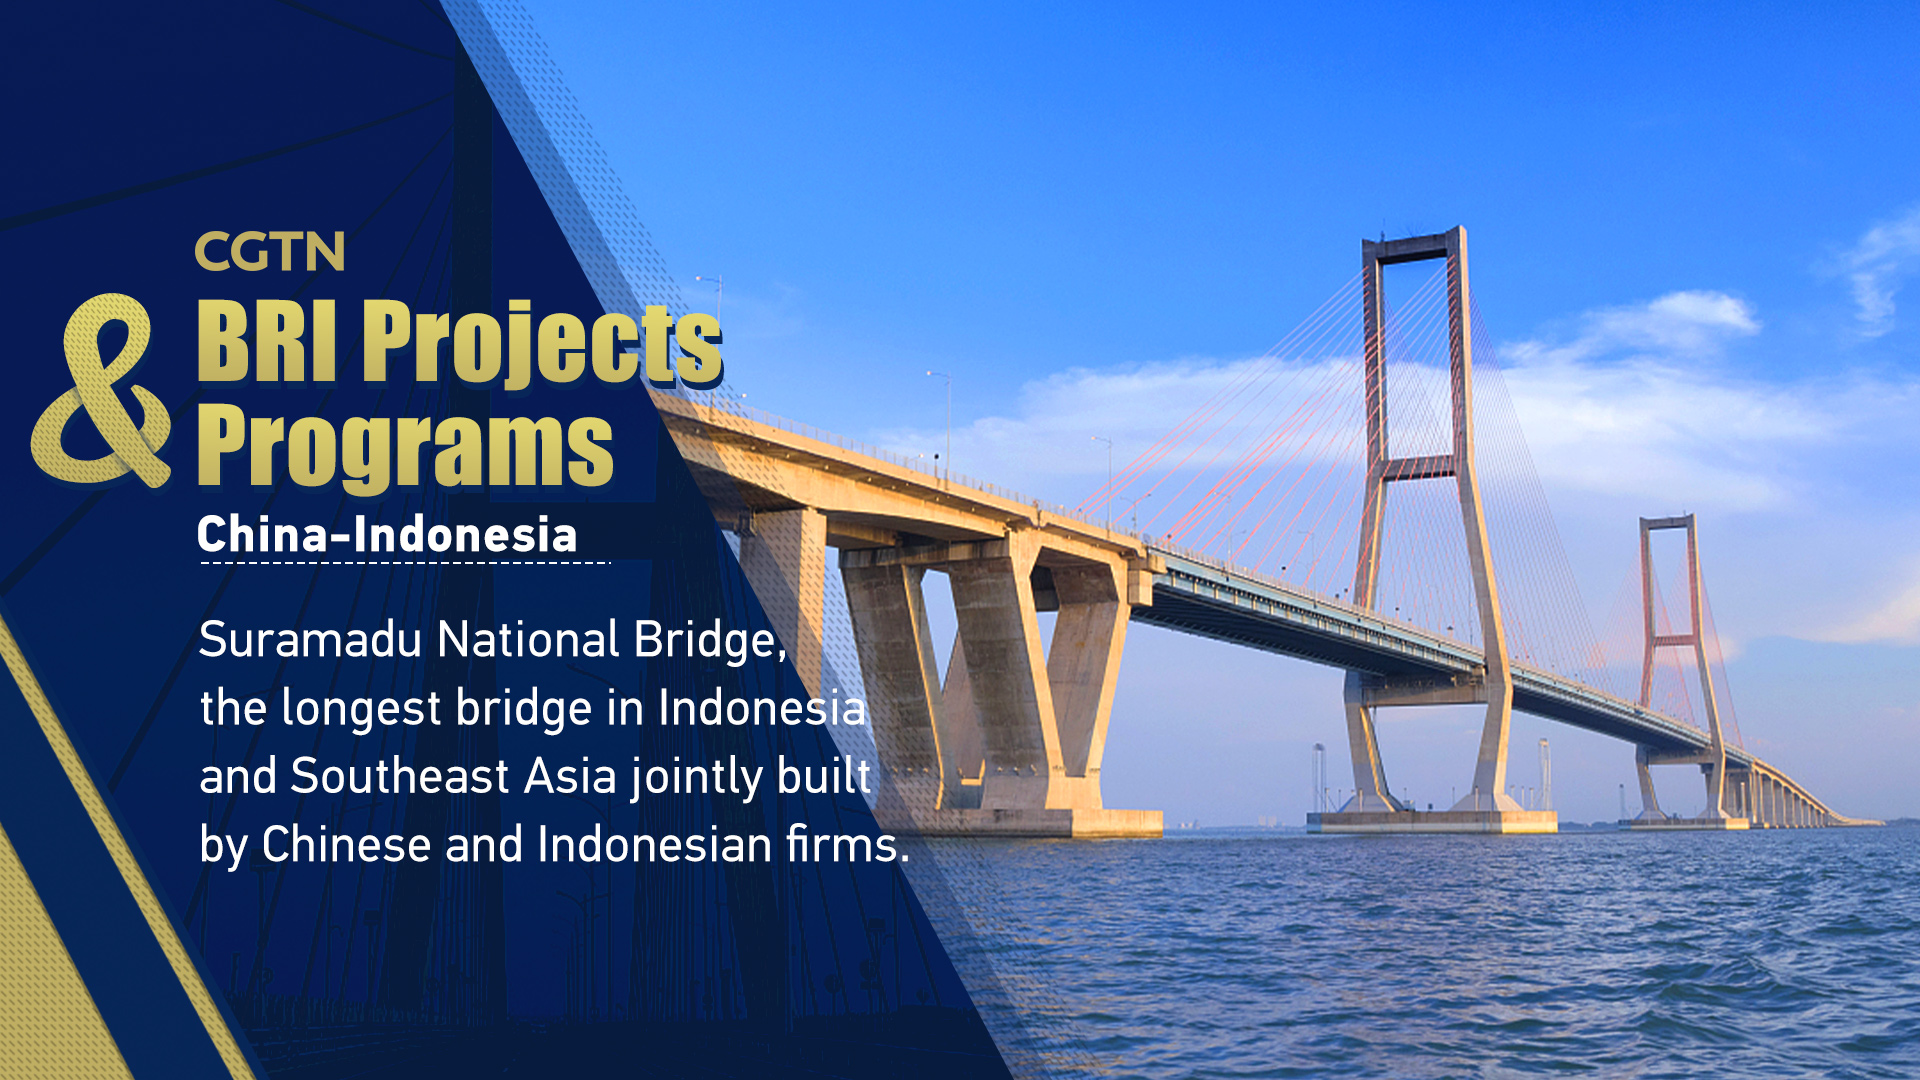 BRI Projects & Programs: China, Indonesia jointly build Southeast Asia's longest bridge